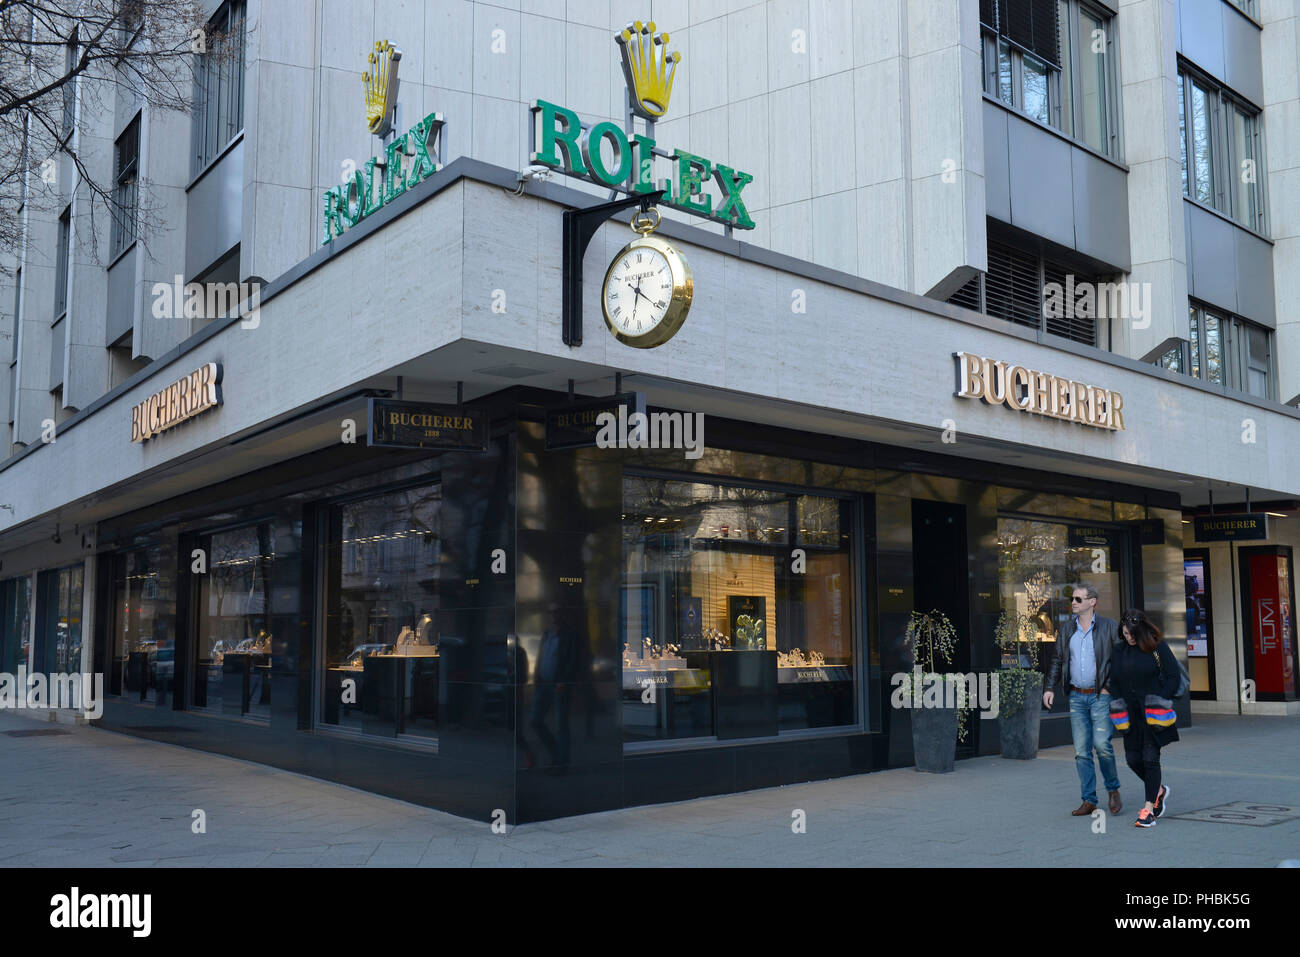 Rolex Shop Berlin High Resolution Stock Photography and Images - Alamy